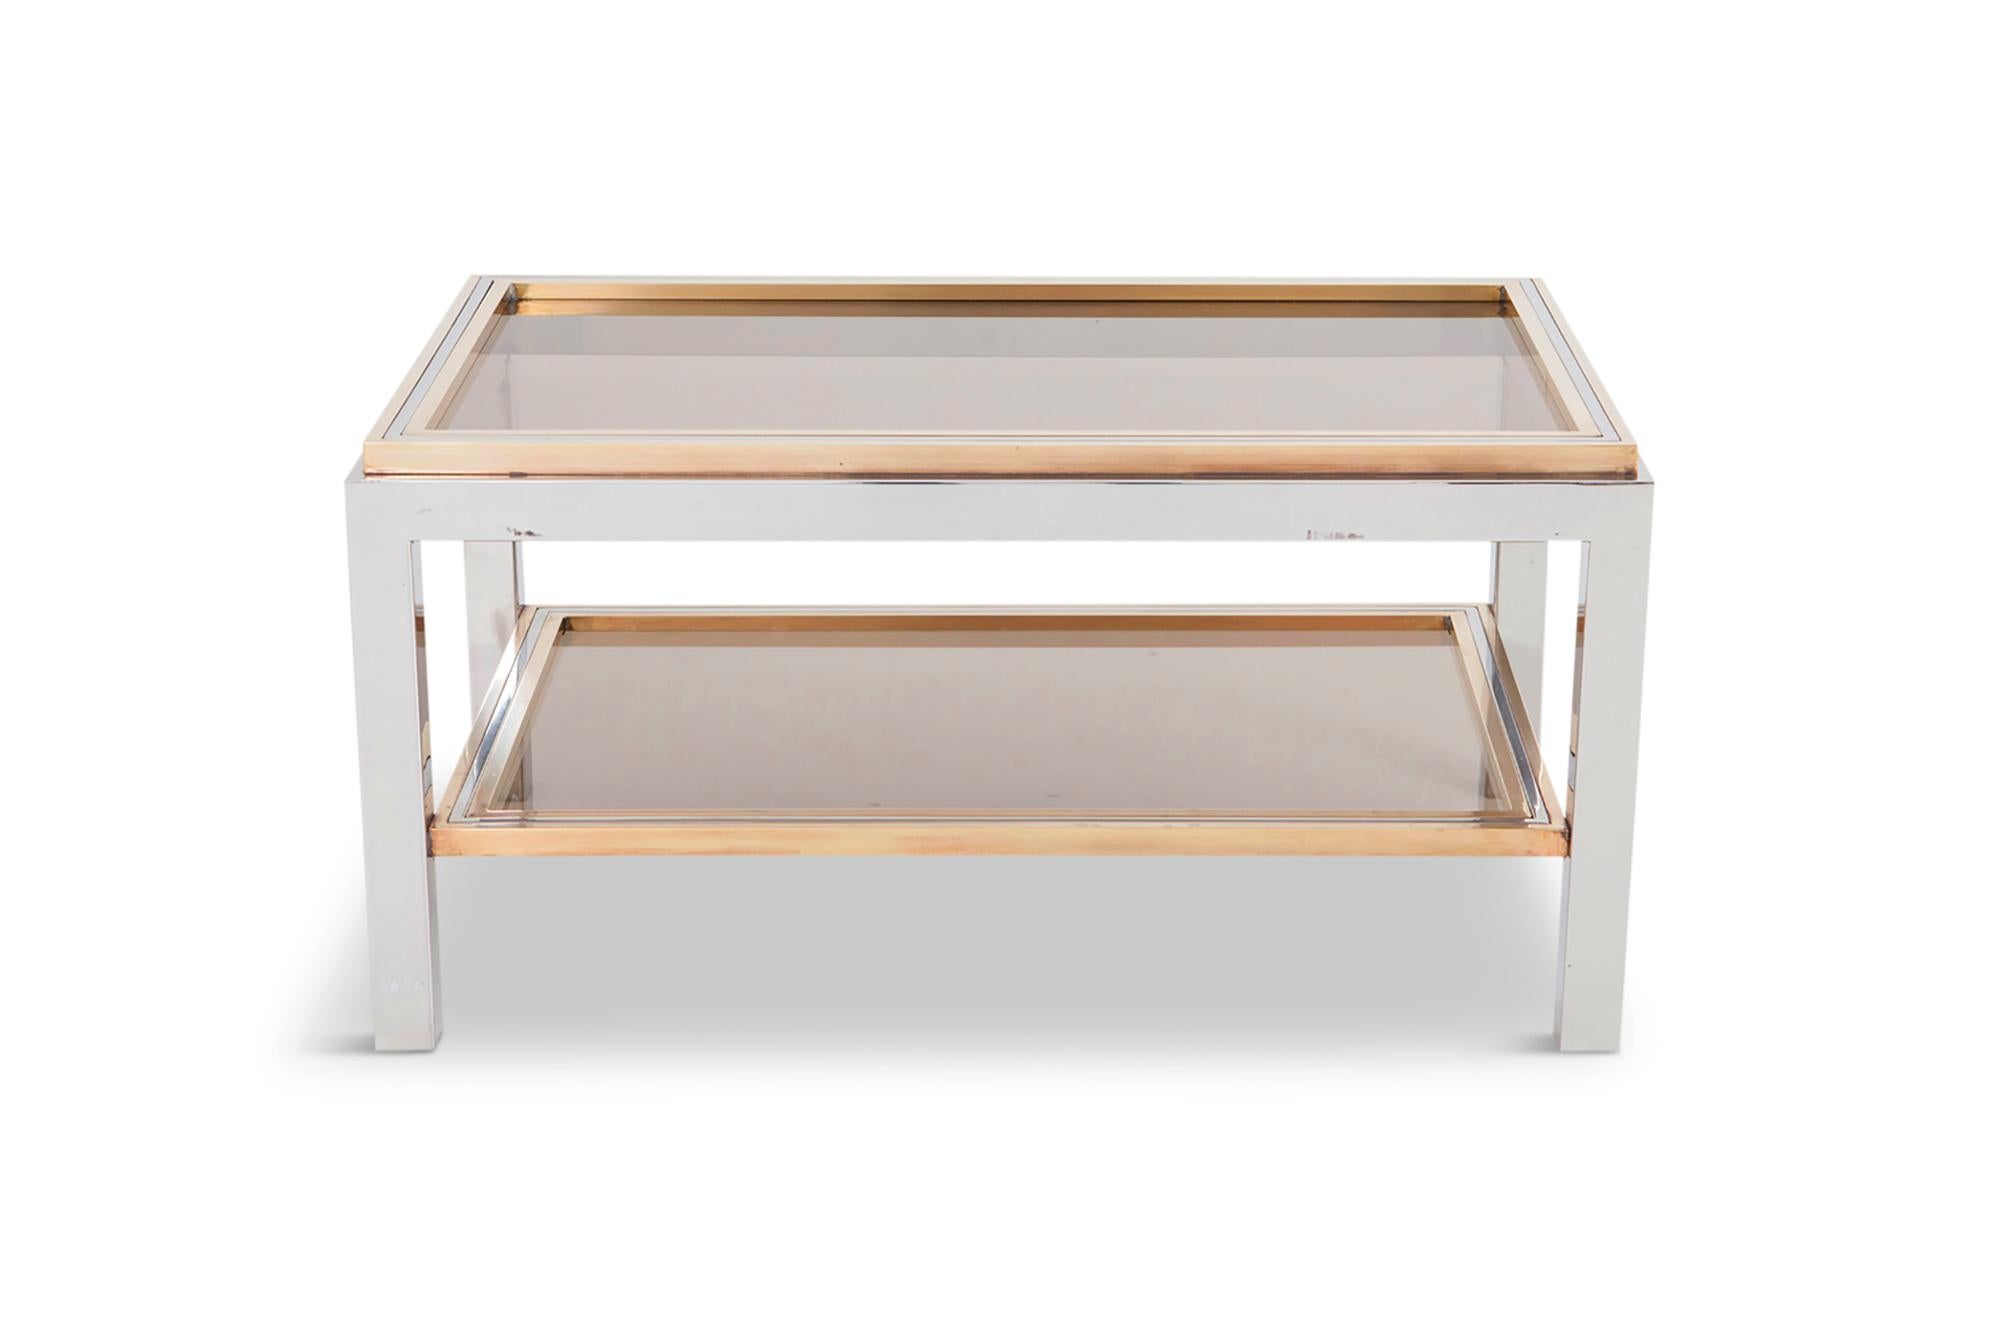 Brass, chrome and smoked glass rectangular coffee table by Willy Rizzo, 1970s.

This two-tier table is designed with a chrome-plated steel frame and wonderful brass edges
A well known design of the master, the rich contrast in materials make this